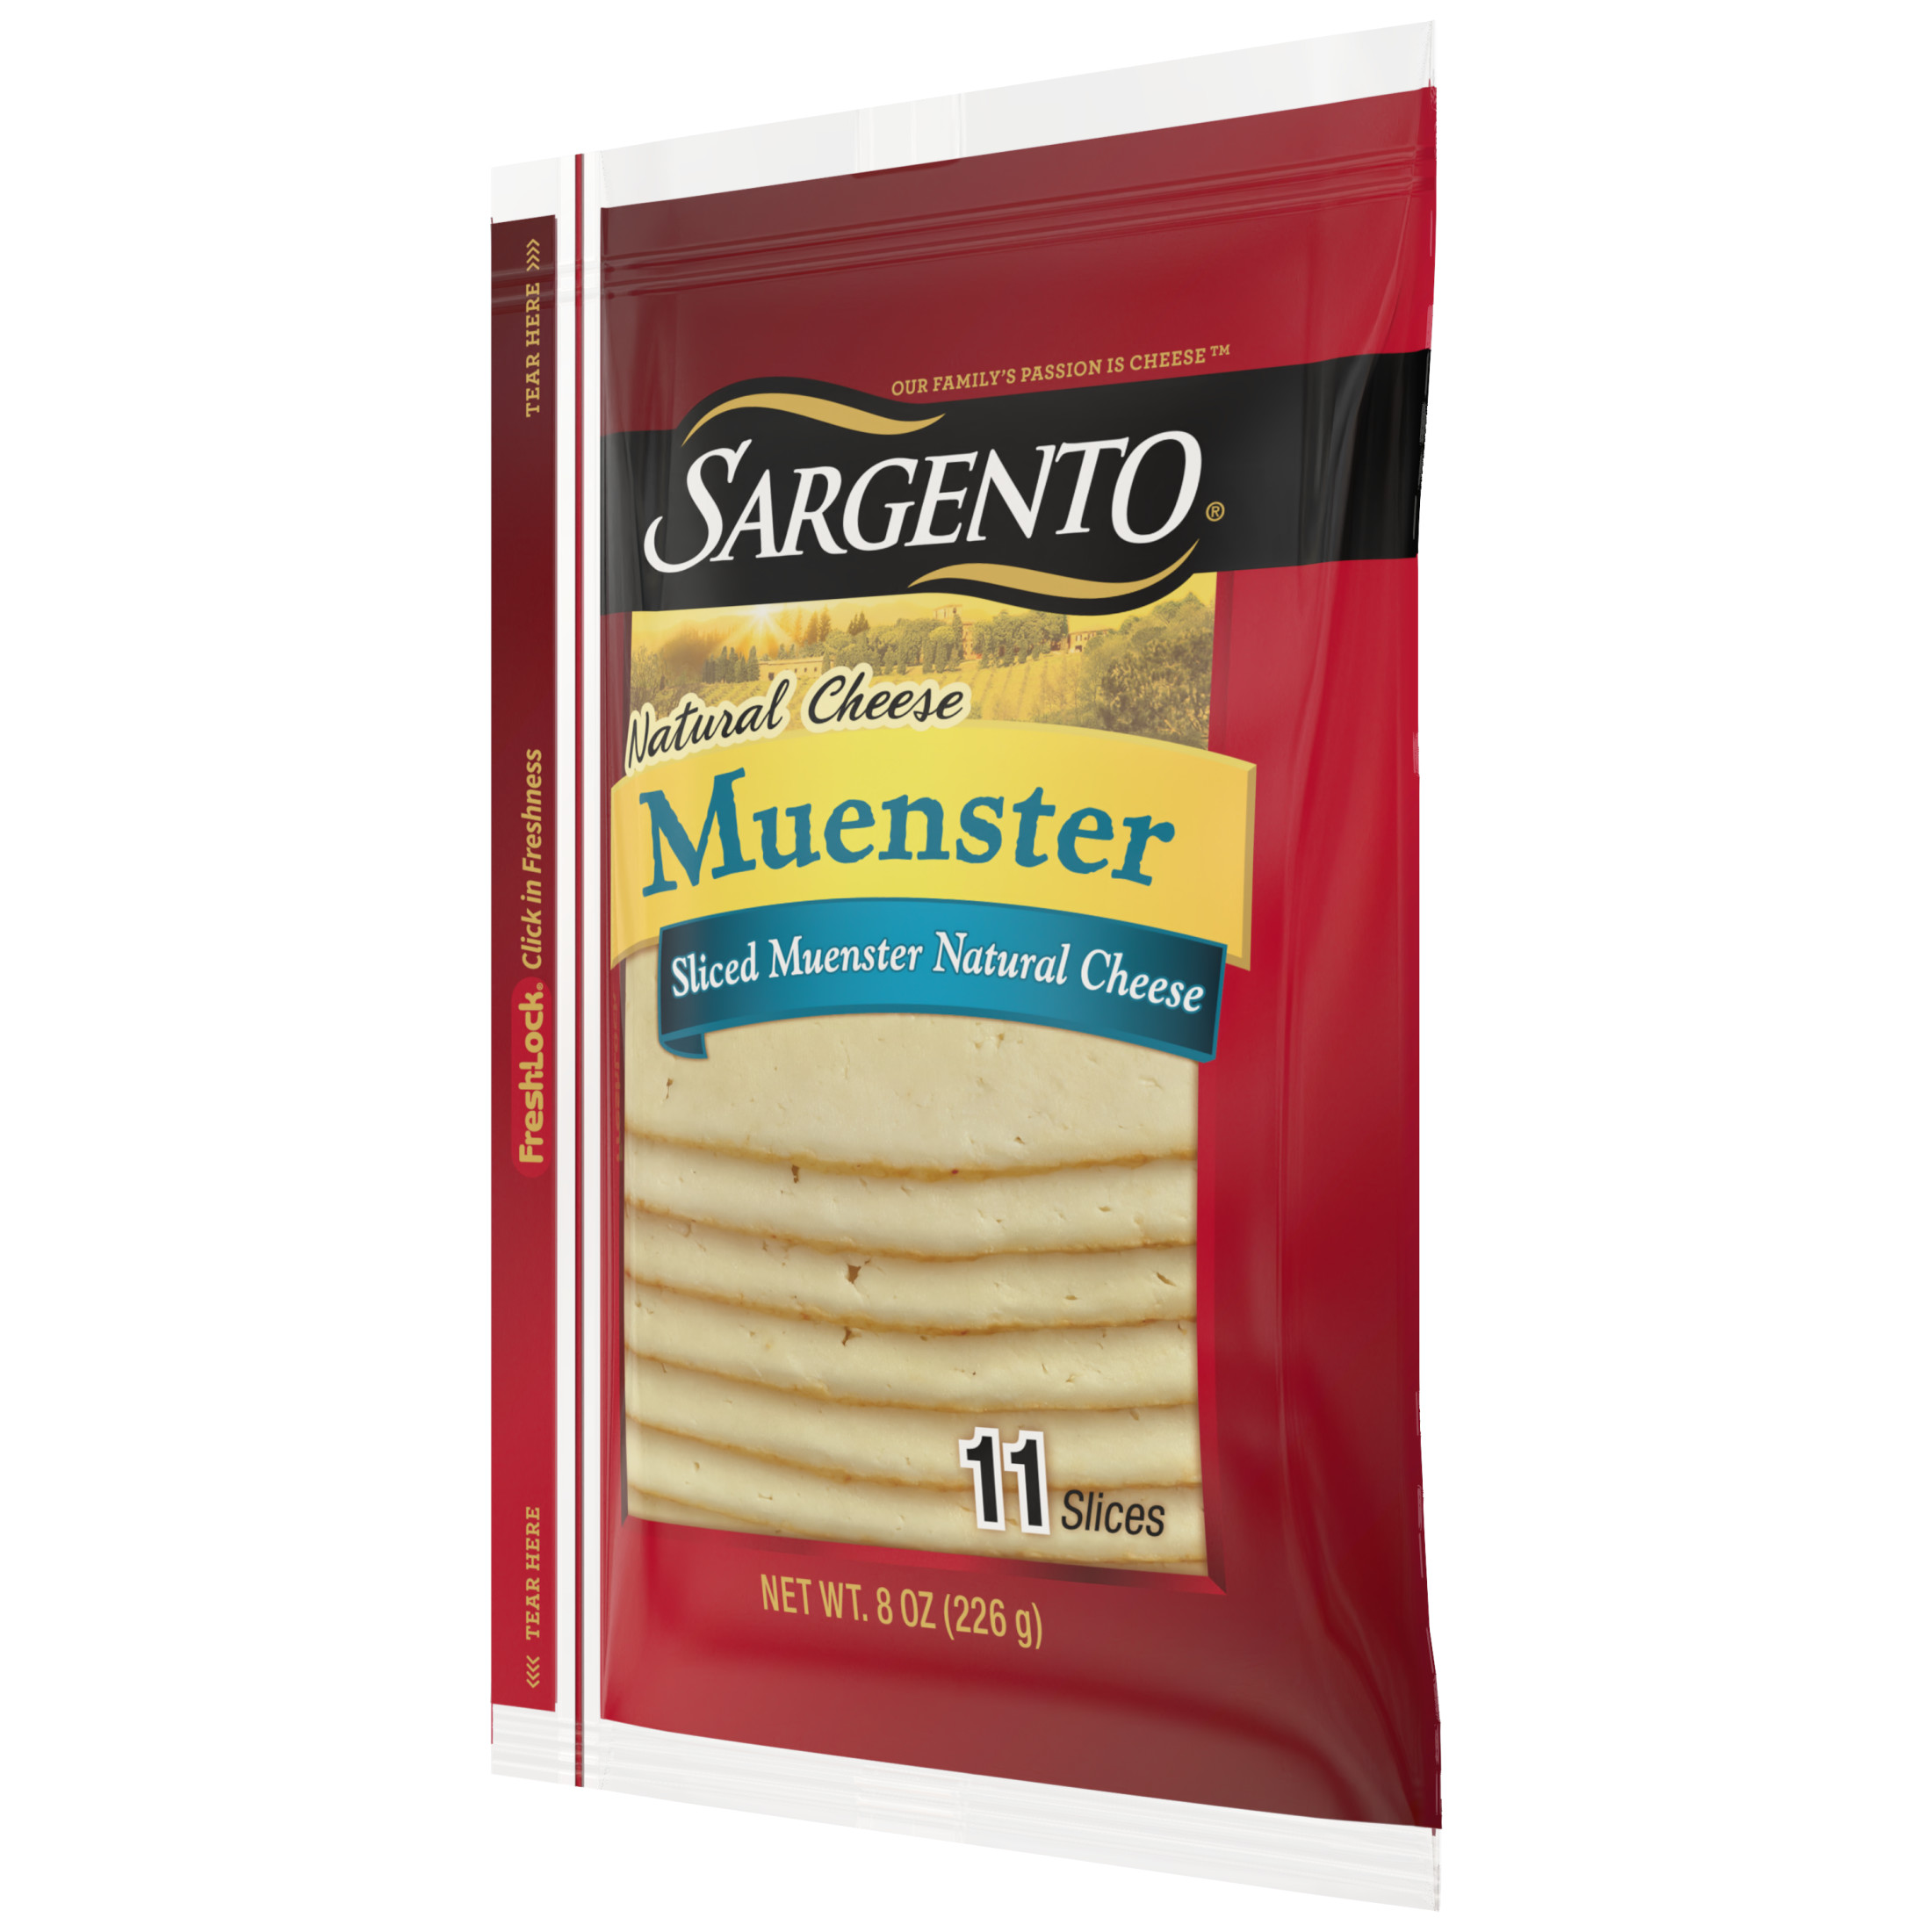 Sargento® Sliced Muenster Natural Cheese, 11 Slices - image 5 of 6